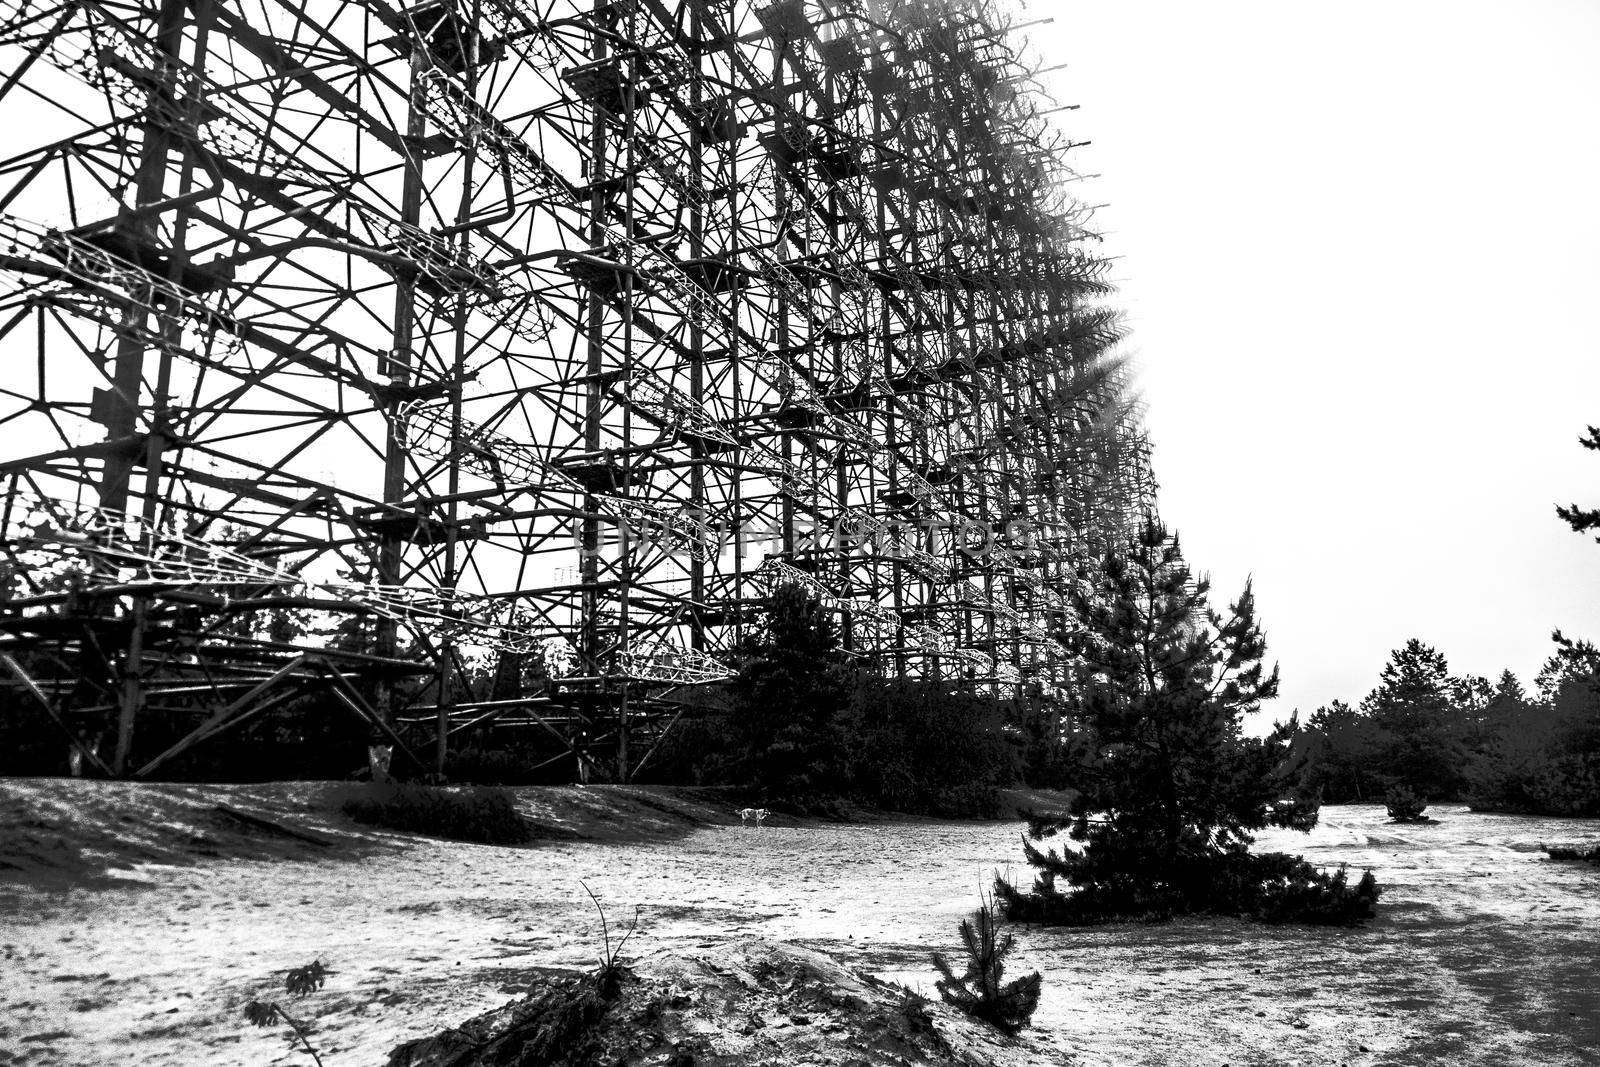 Soviet over-the-horizon radar station Duga in the Chernobyl exclusion zone, Ukraine by mosfet_ua